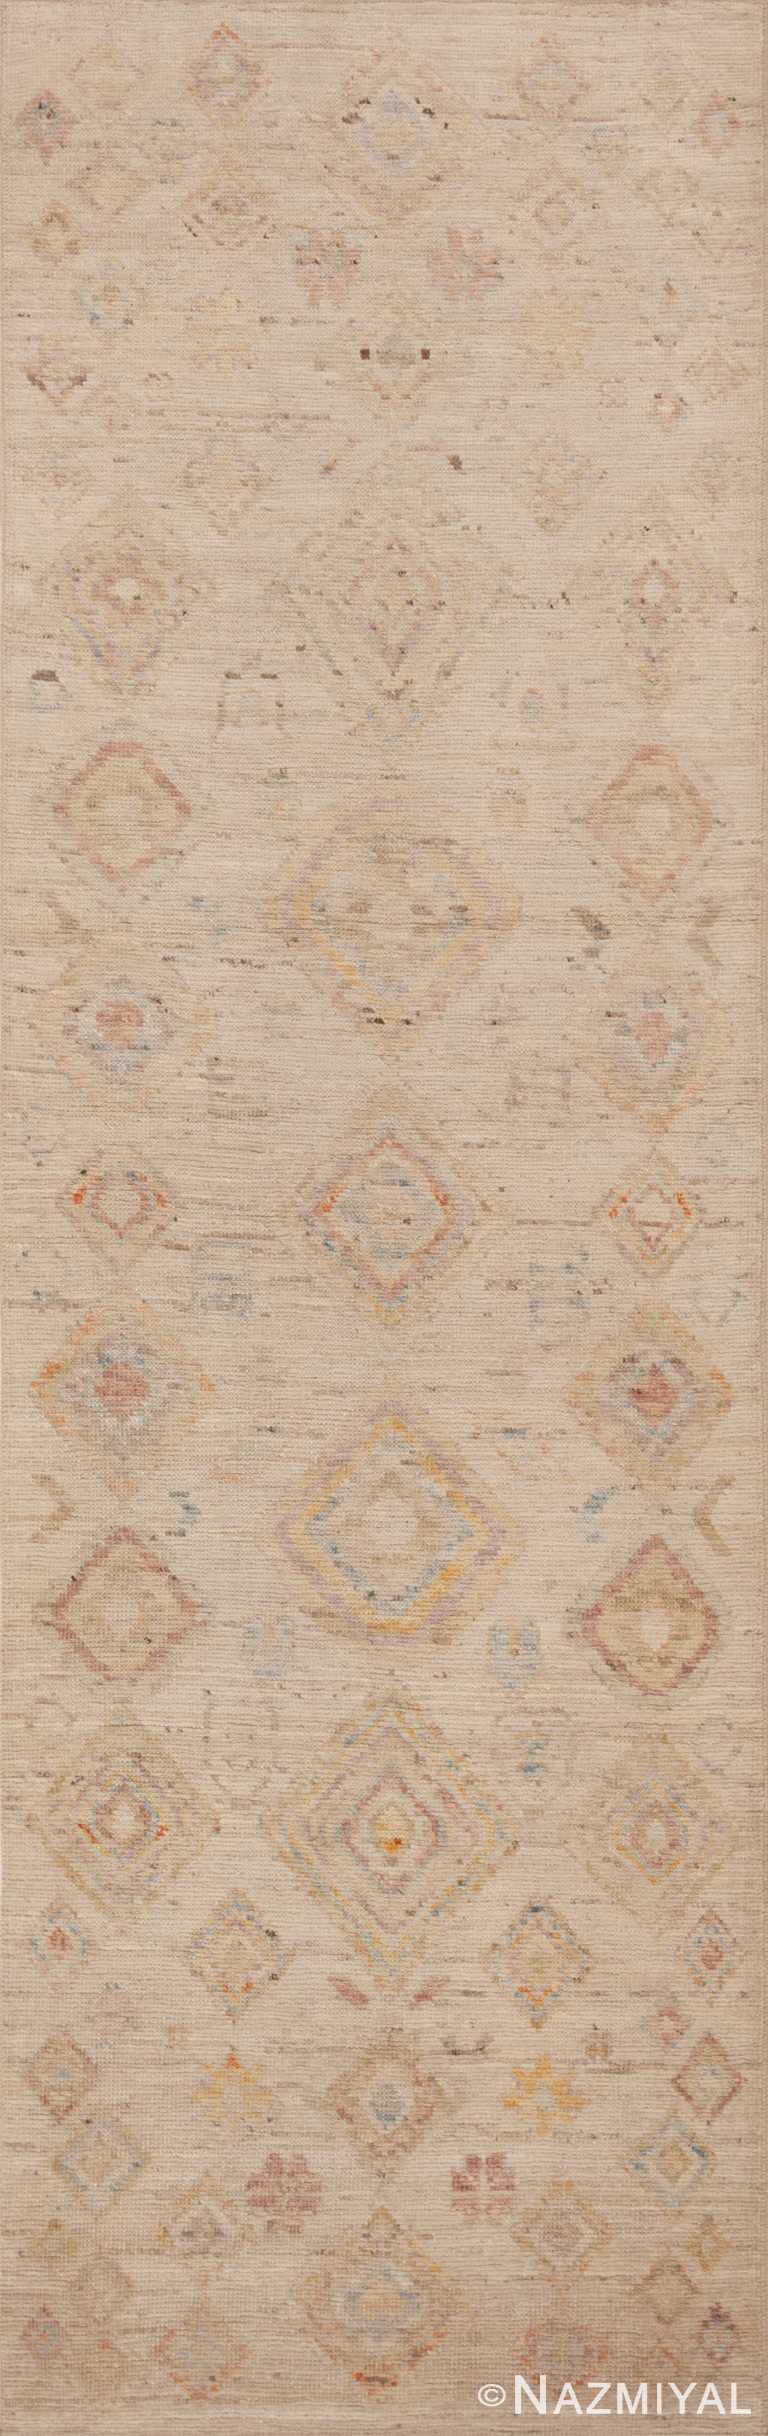 Light Cream Ivory Color Background and Soft Rustic Tribal Pattern Modern Hallway Runner Rug 11049 by Nazmiyal Antique rugs